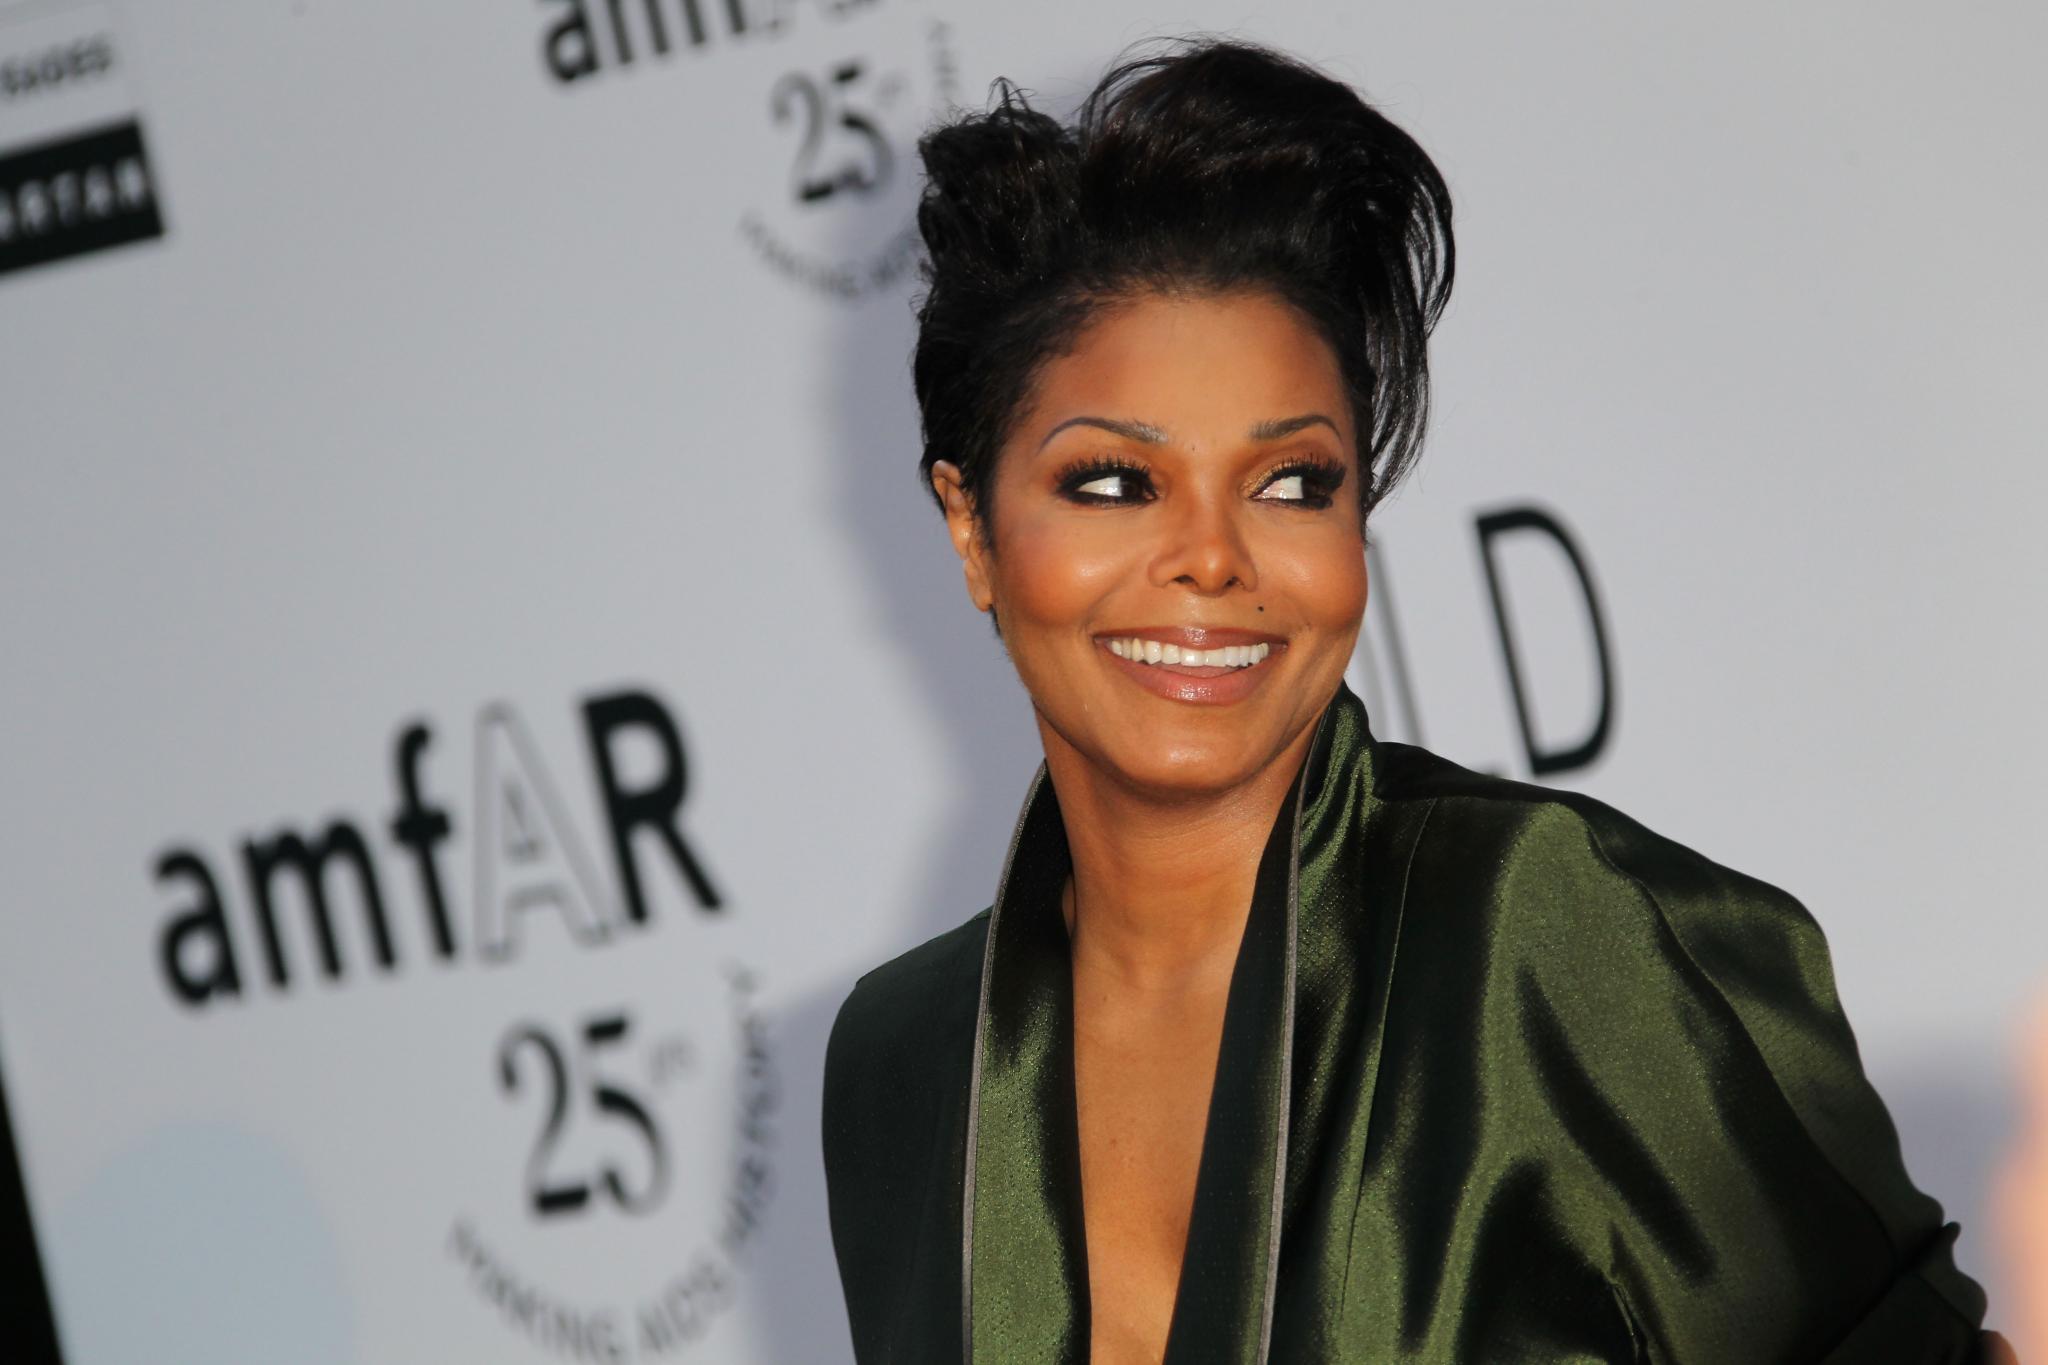 Ever Wondered What It's Like to Audition for Janet Jackson? Get a Sneak Peak Inside the Process